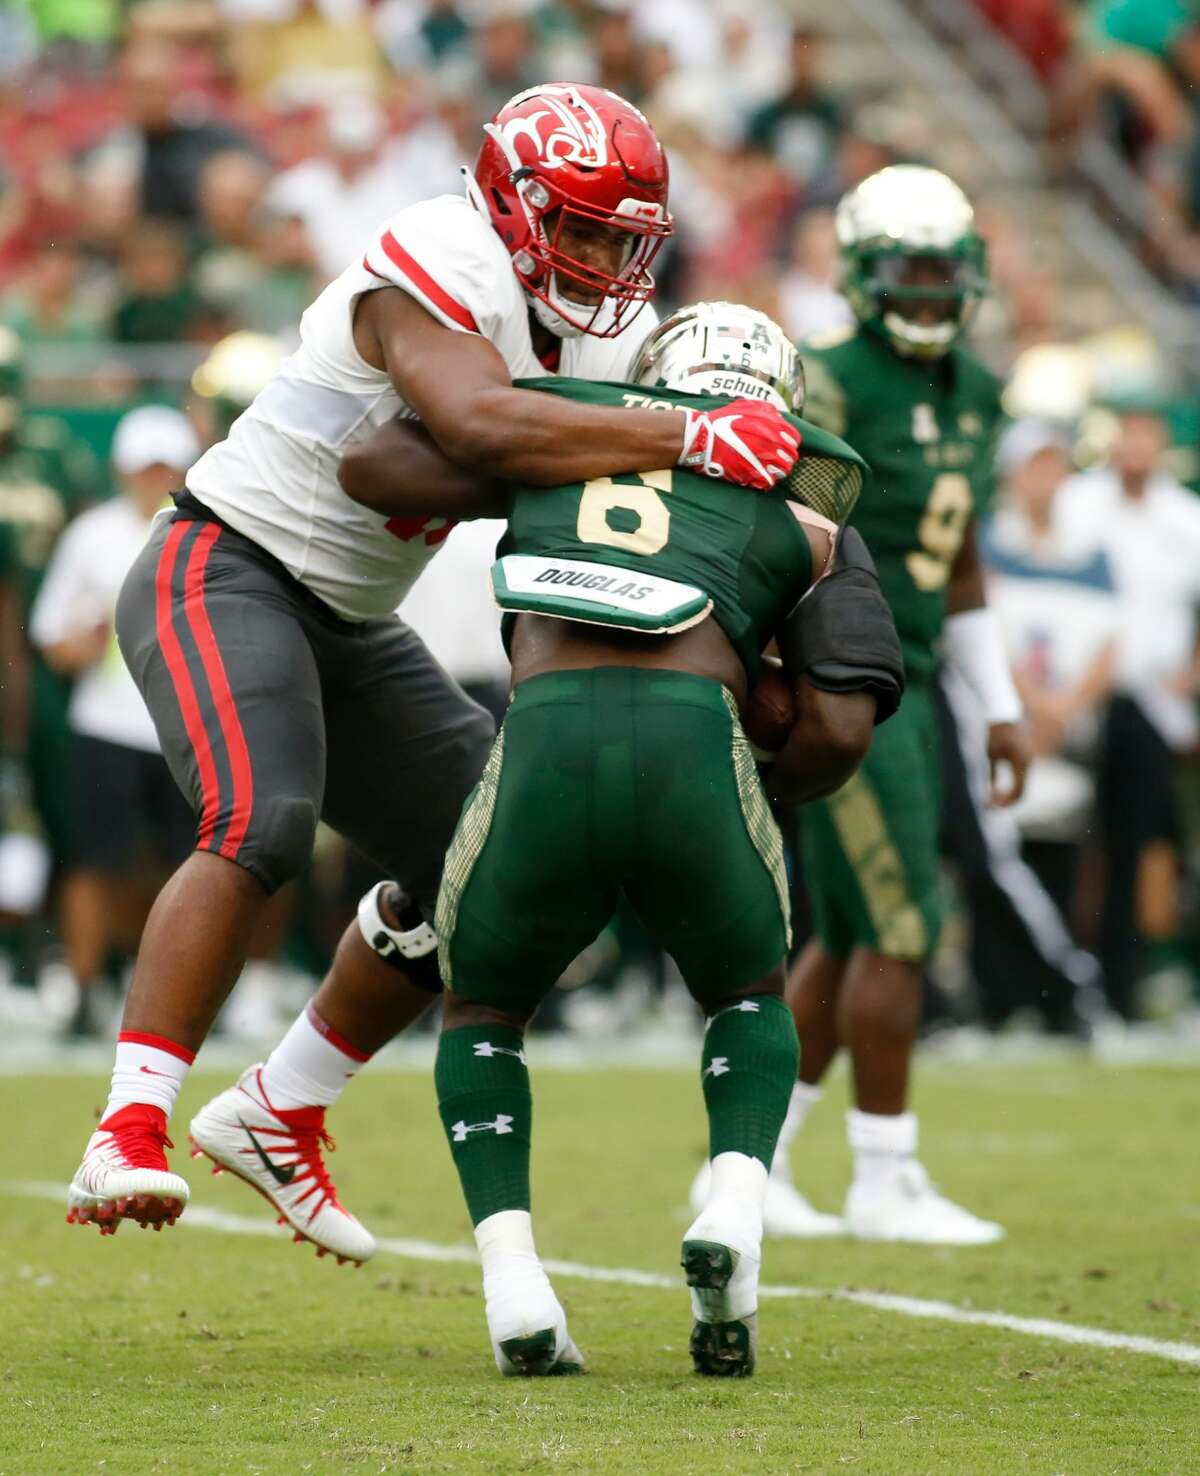 TAMPA, FL - OCTOBER 28: Defensive tackle Ed Oliver #10 of the Houston Cougars tackles running back Darius Tice #6 of the South Florida Bulls during the first quarter of an NCAA football game on October 28, 2017 at Raymond James Stadium in Tampa, Florida. (Photo by Brian Blanco/Getty Images)